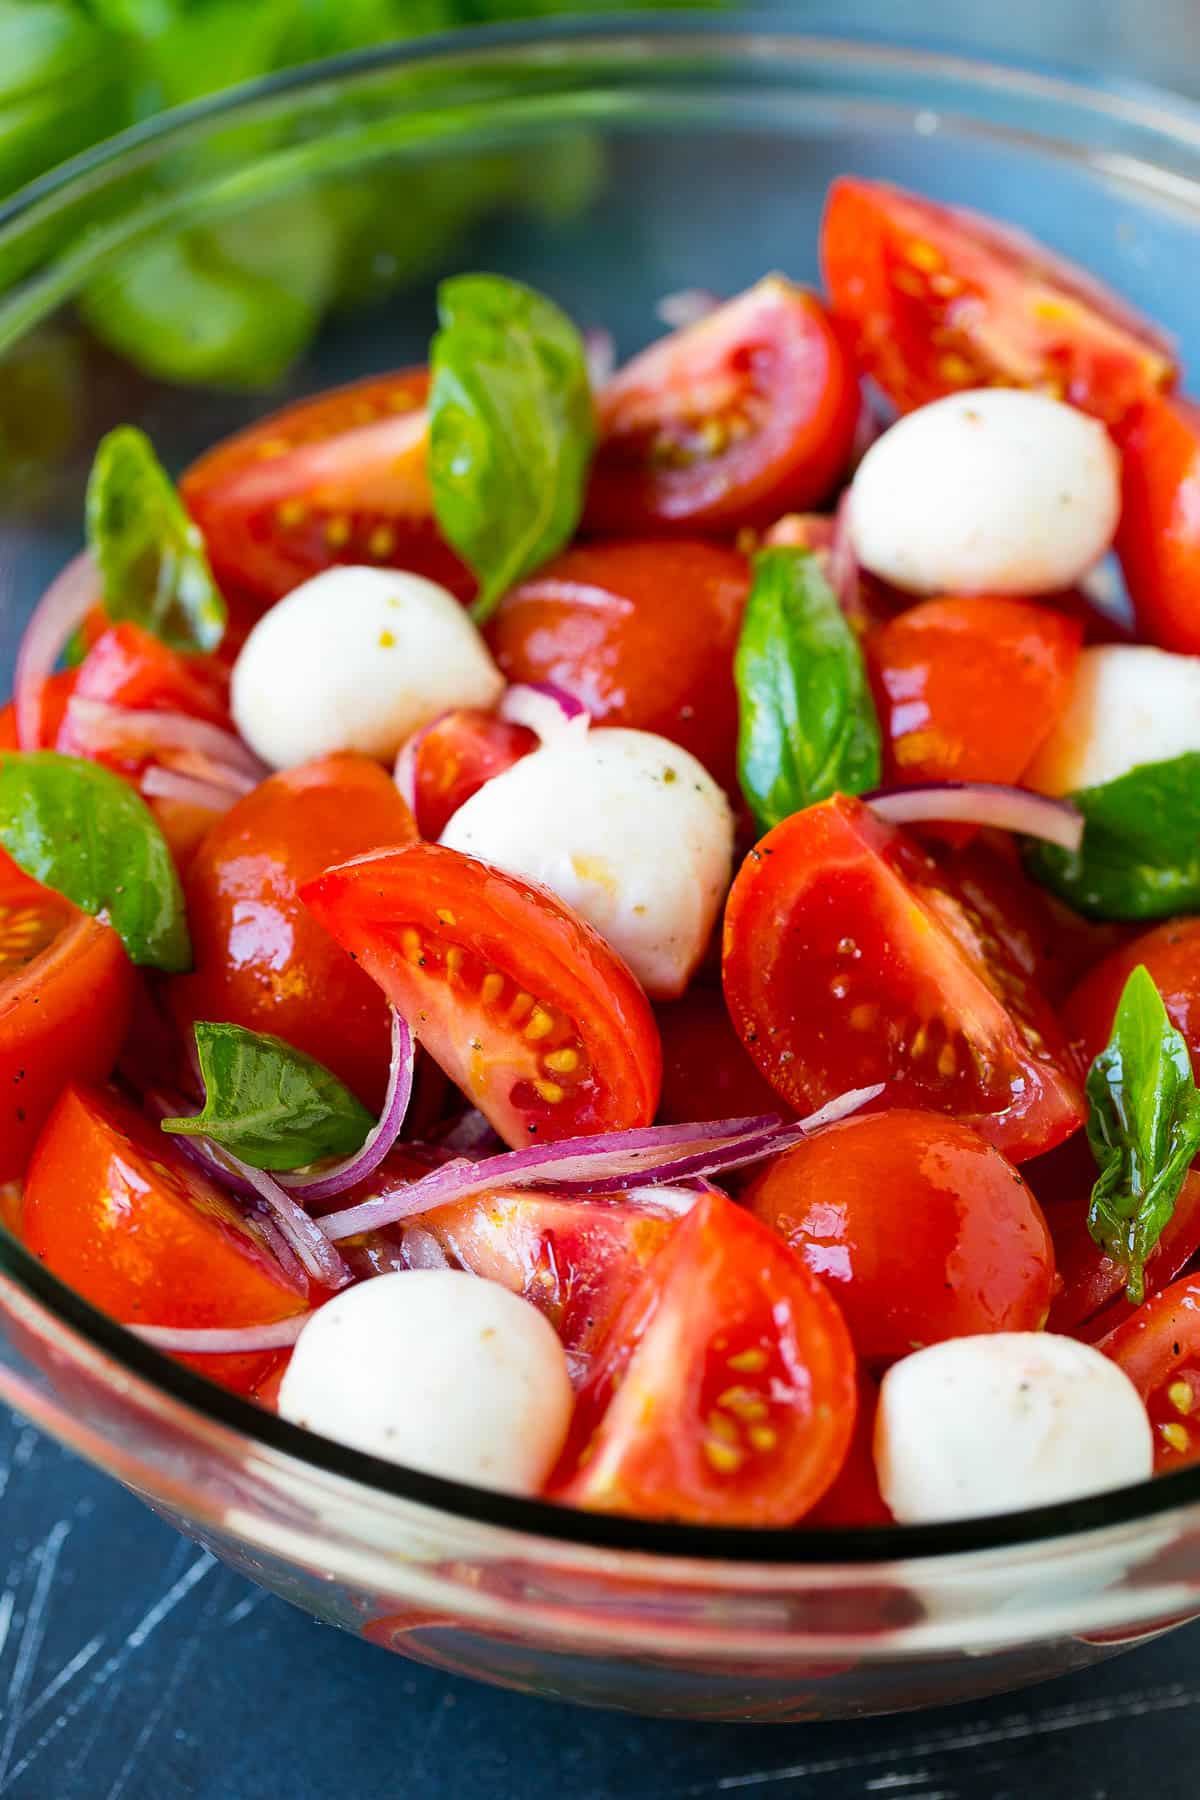 A close up of tomatoes mixed with basil, mozzarella and red onion.